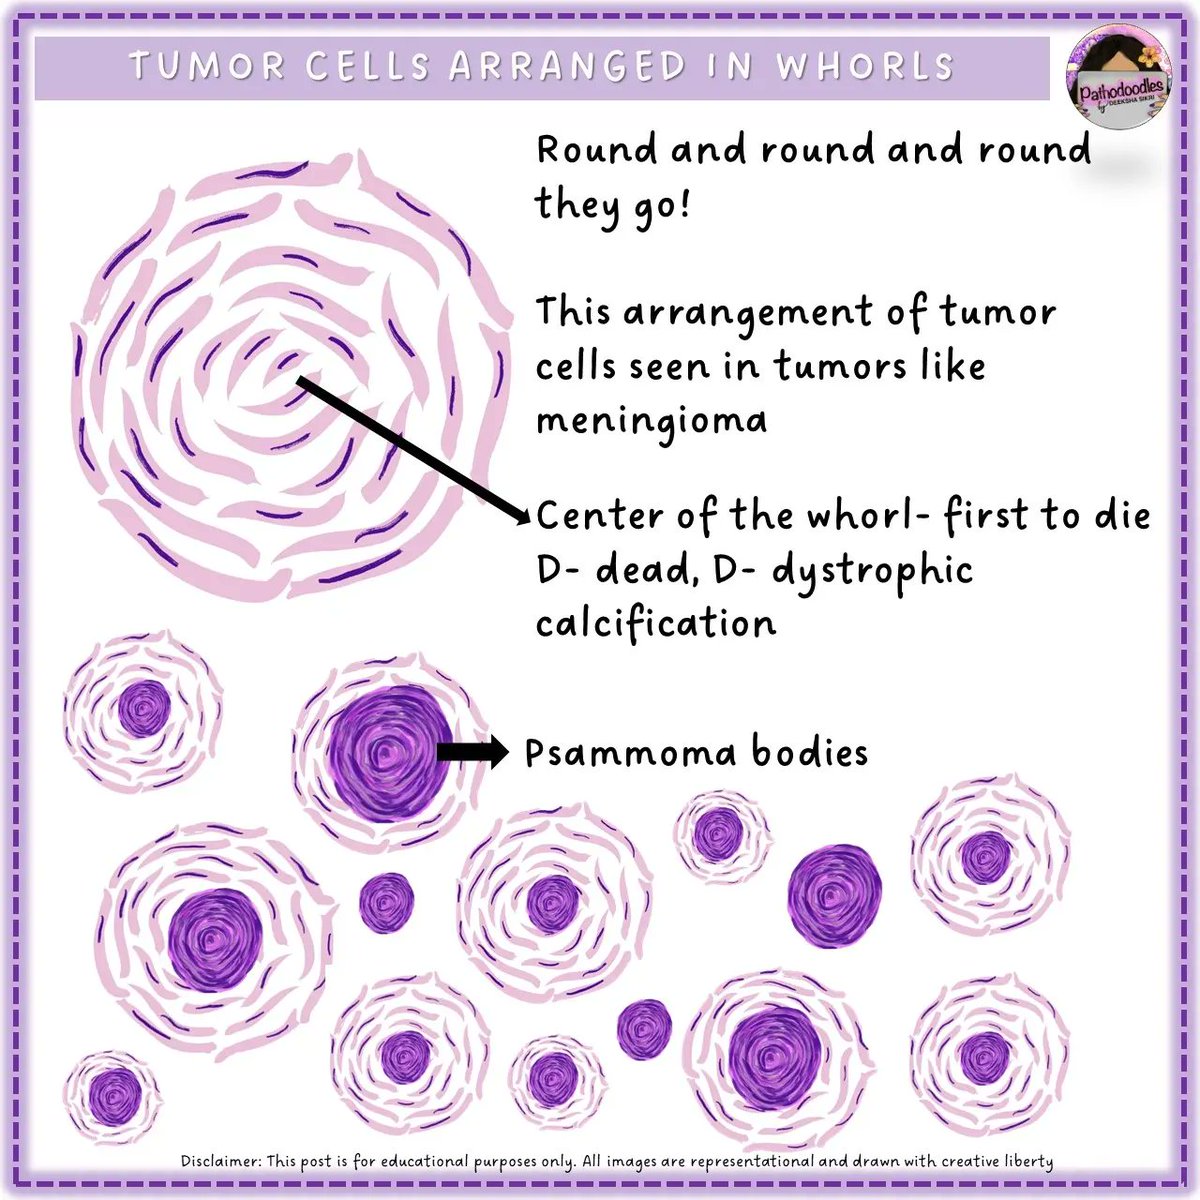 #pathodoodles way to understand how and where of Psammoma bodies for #MedicalStudentTwitter #MedEd #PathTwitter #USMLE #NEET #inicet